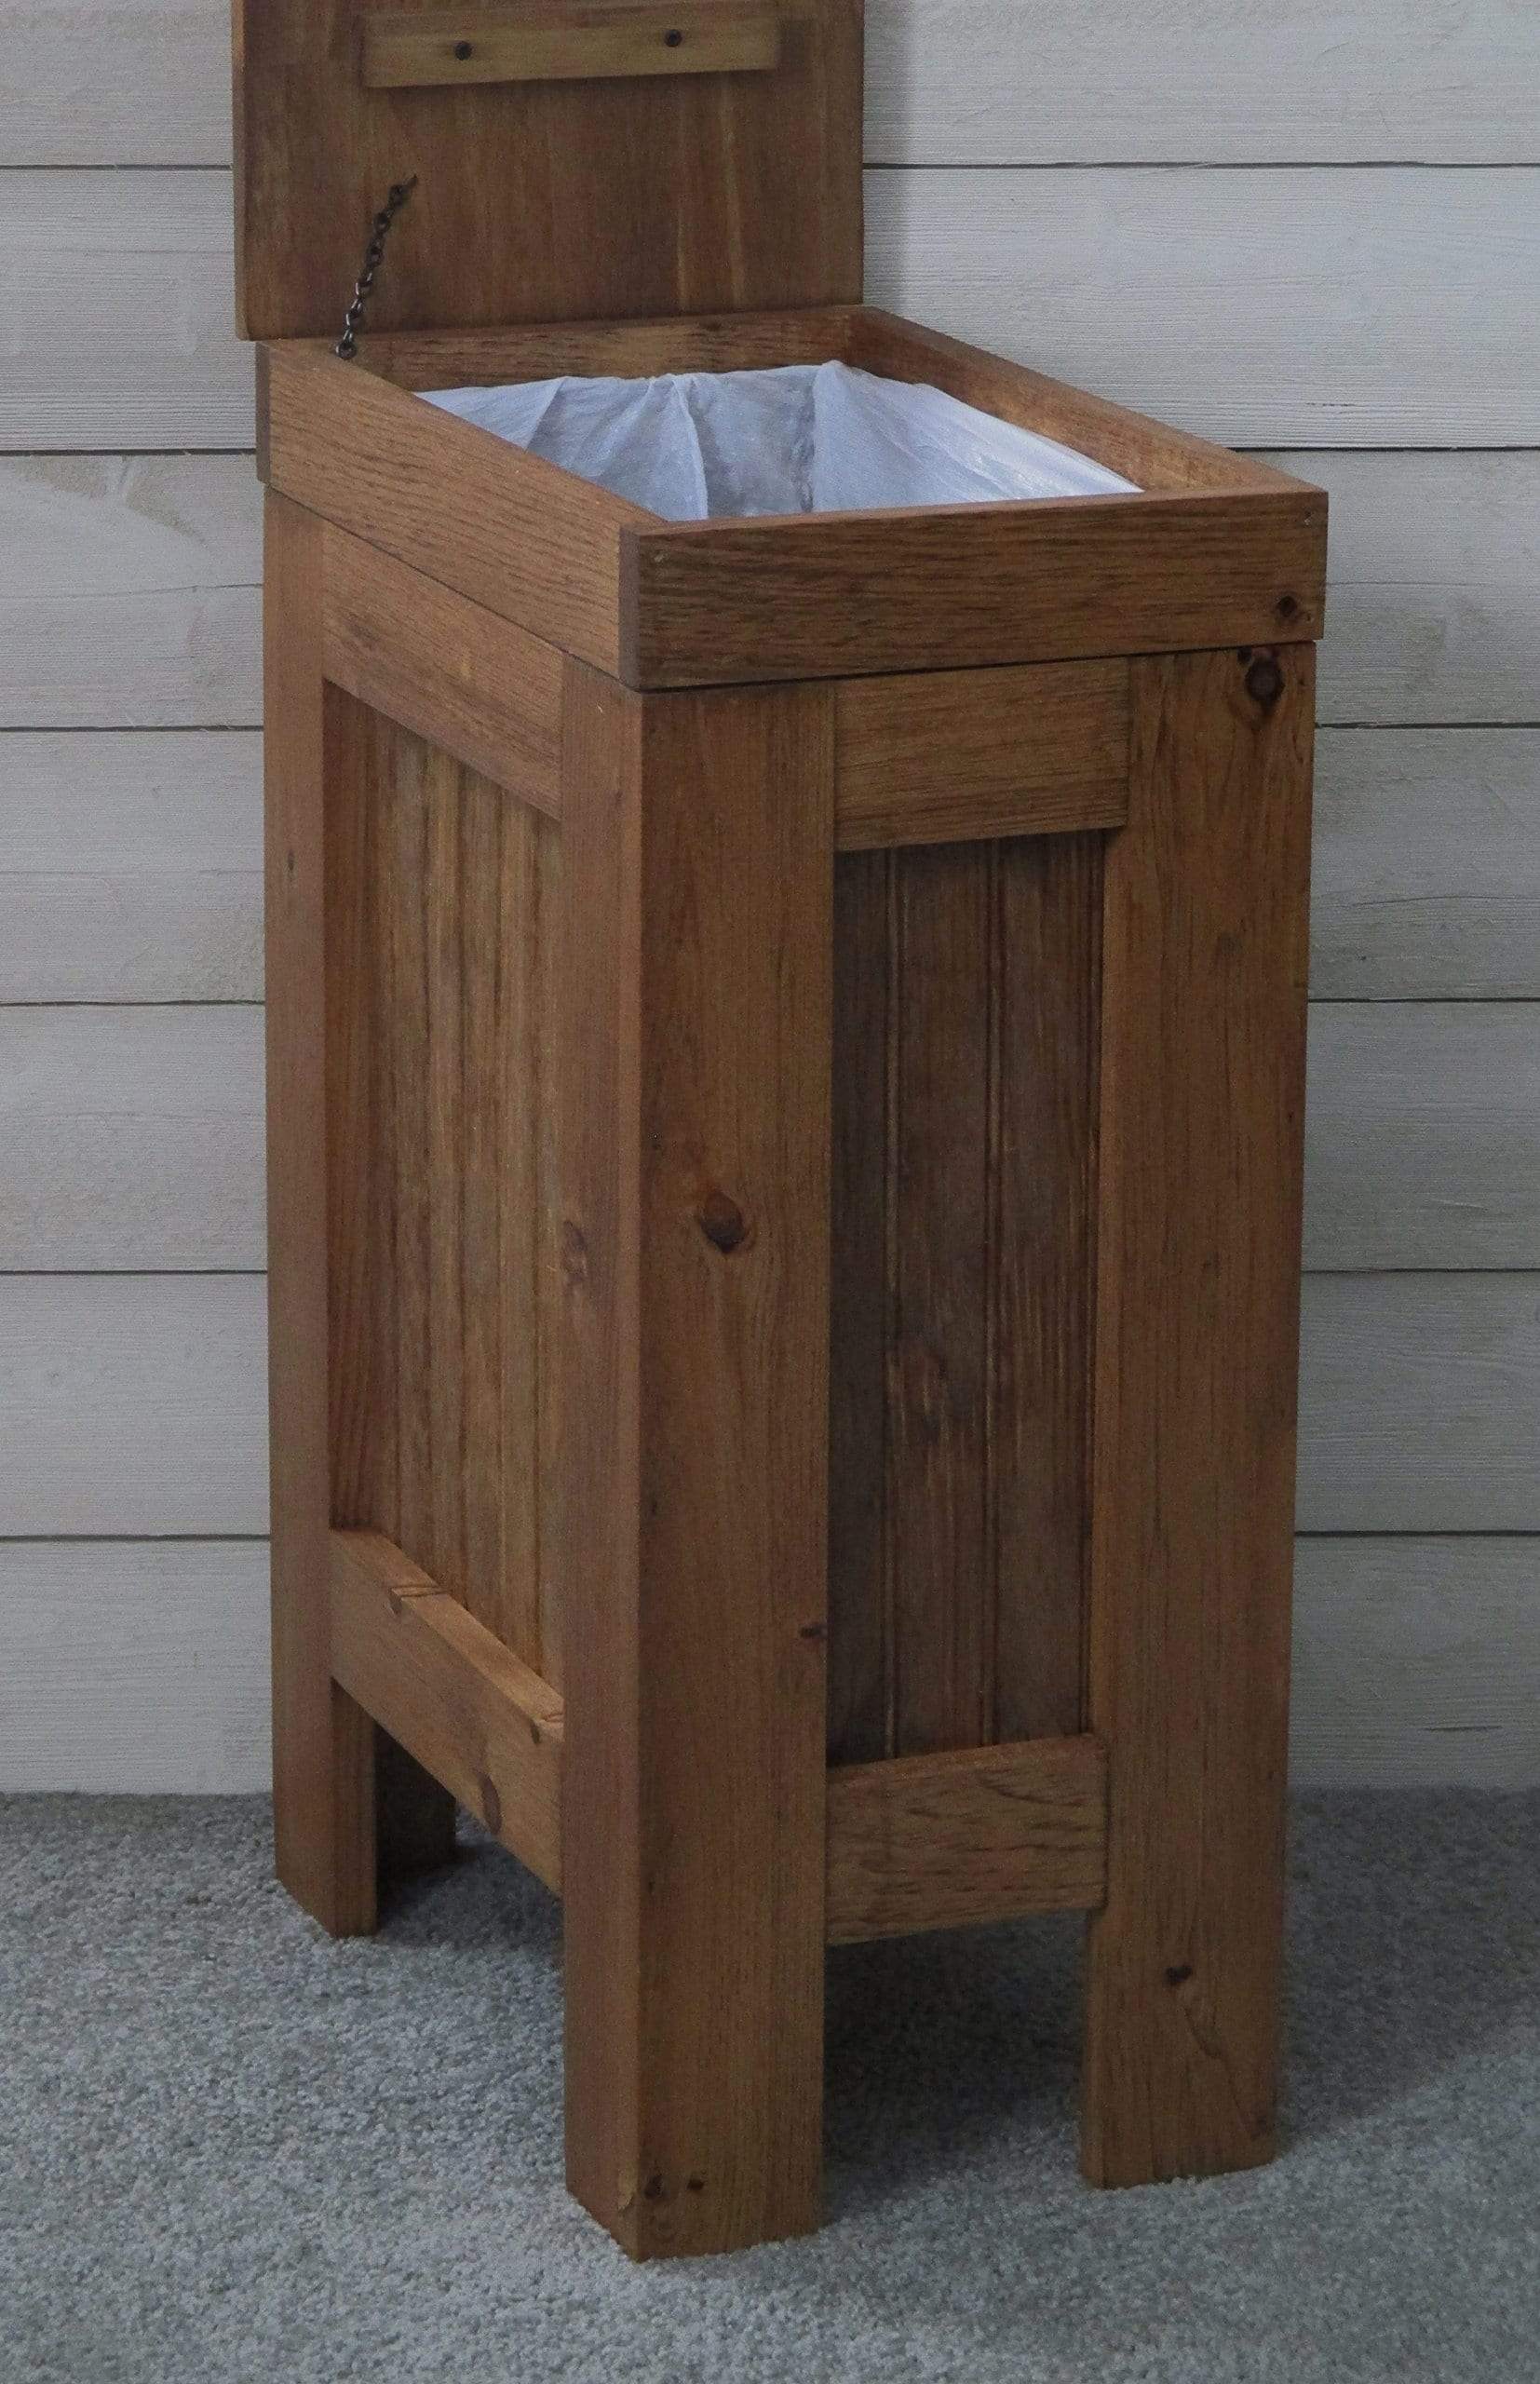 Great wood wooden trash bin kitchen garbage can 13 gallon recycle bin dog food storage early american stain rustic pine metal handle handmade in usa by buffalowoodshop